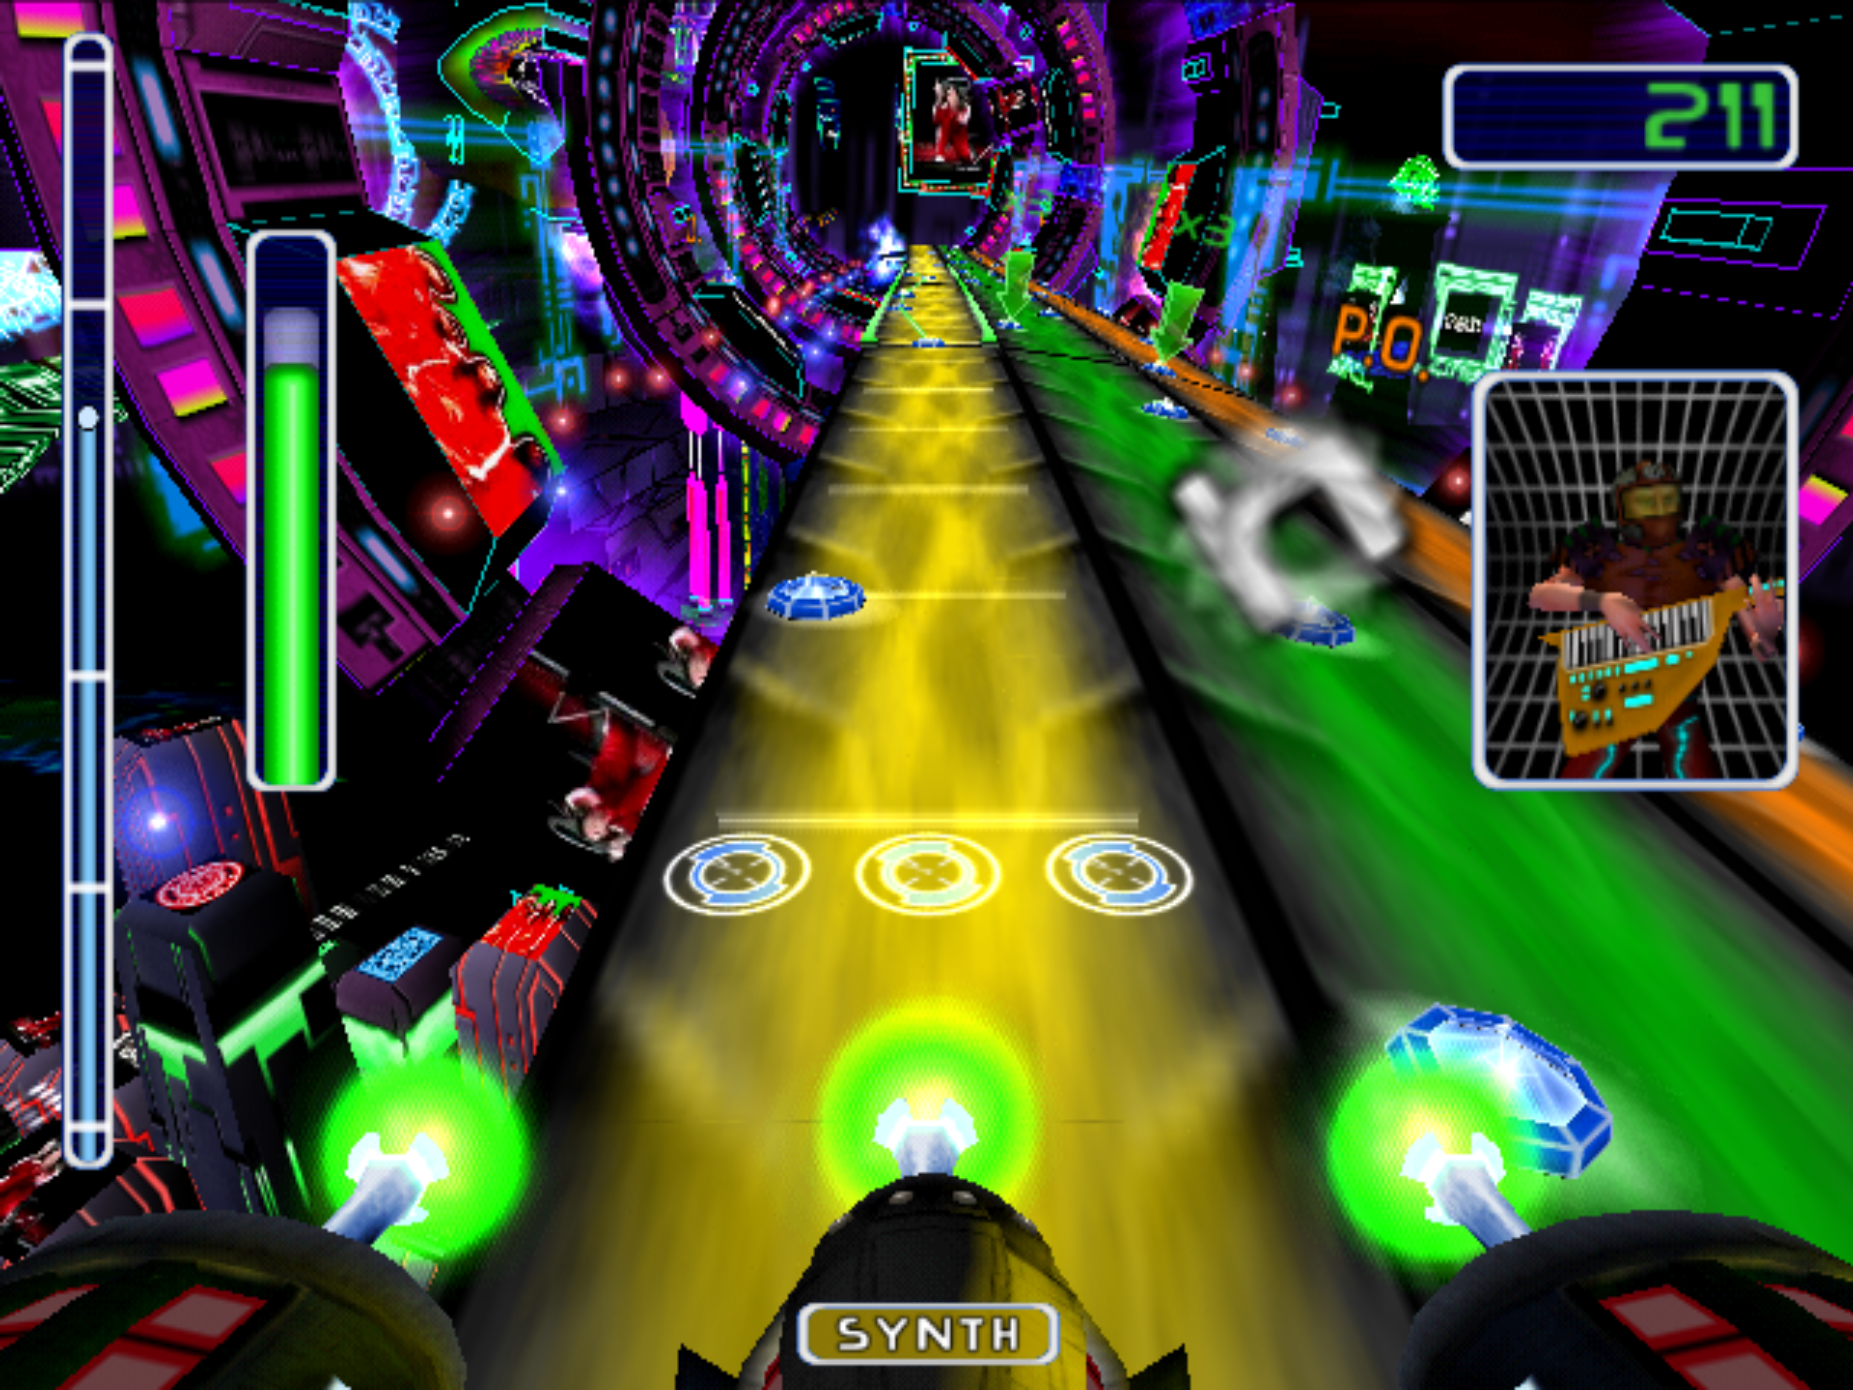 A screen shot from "Amplitude" showcasing the 2000's design aesthetic